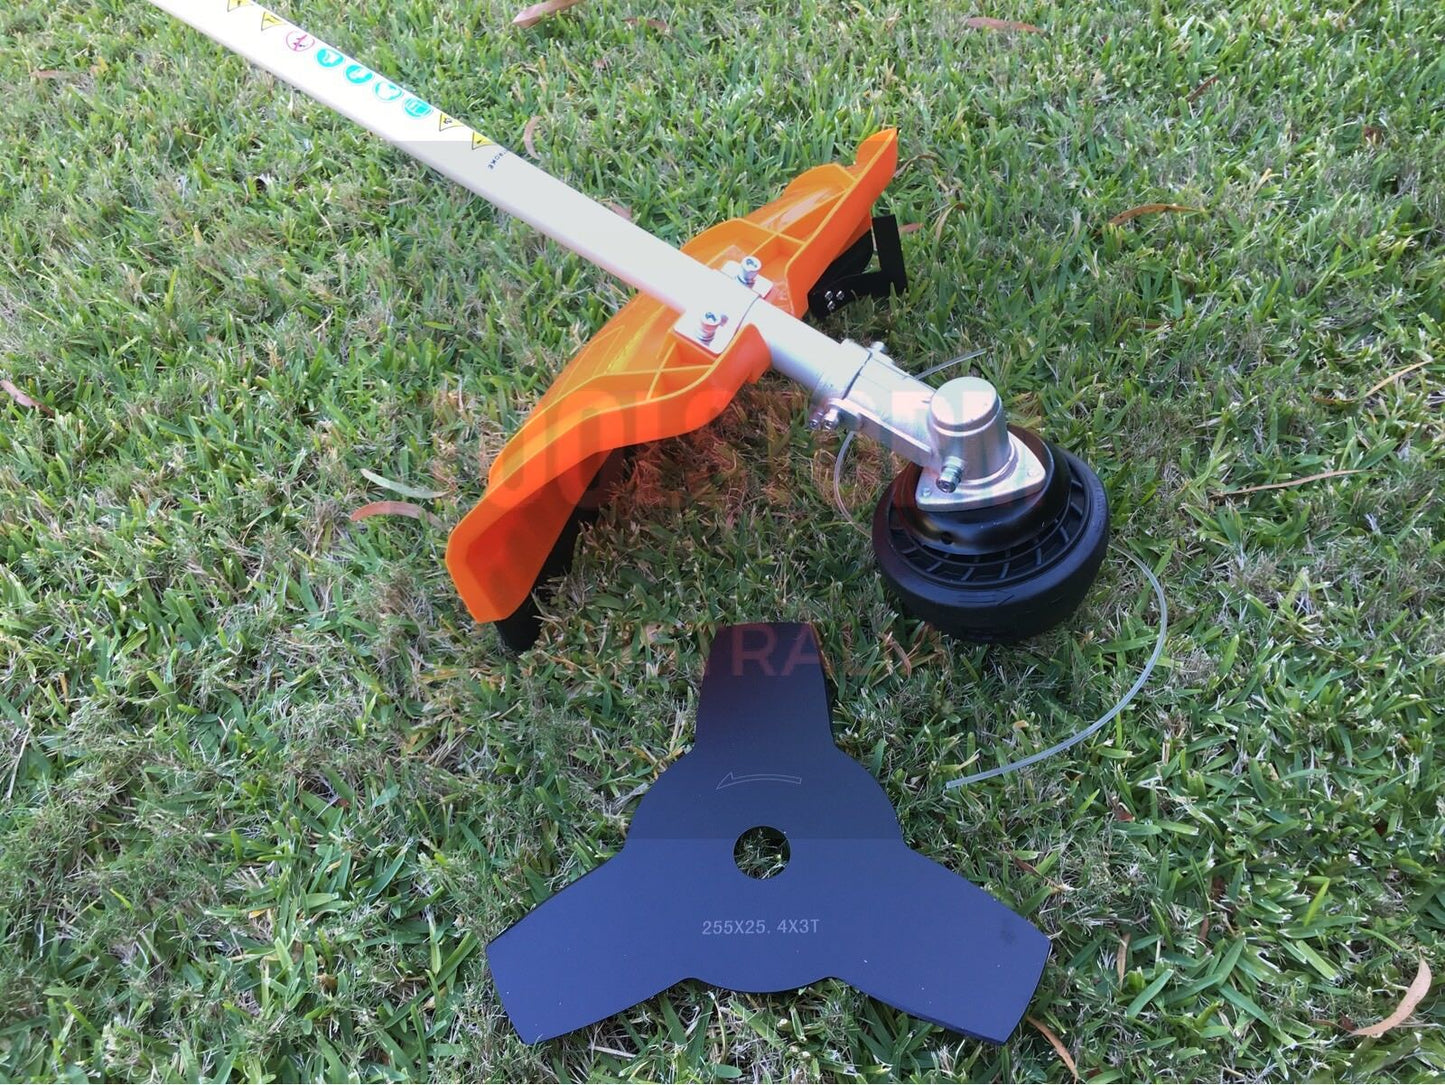 String Trimmer Brush Cutter Attachment Fit TOOLSTORM 4-STROKE Multi-tools Saw